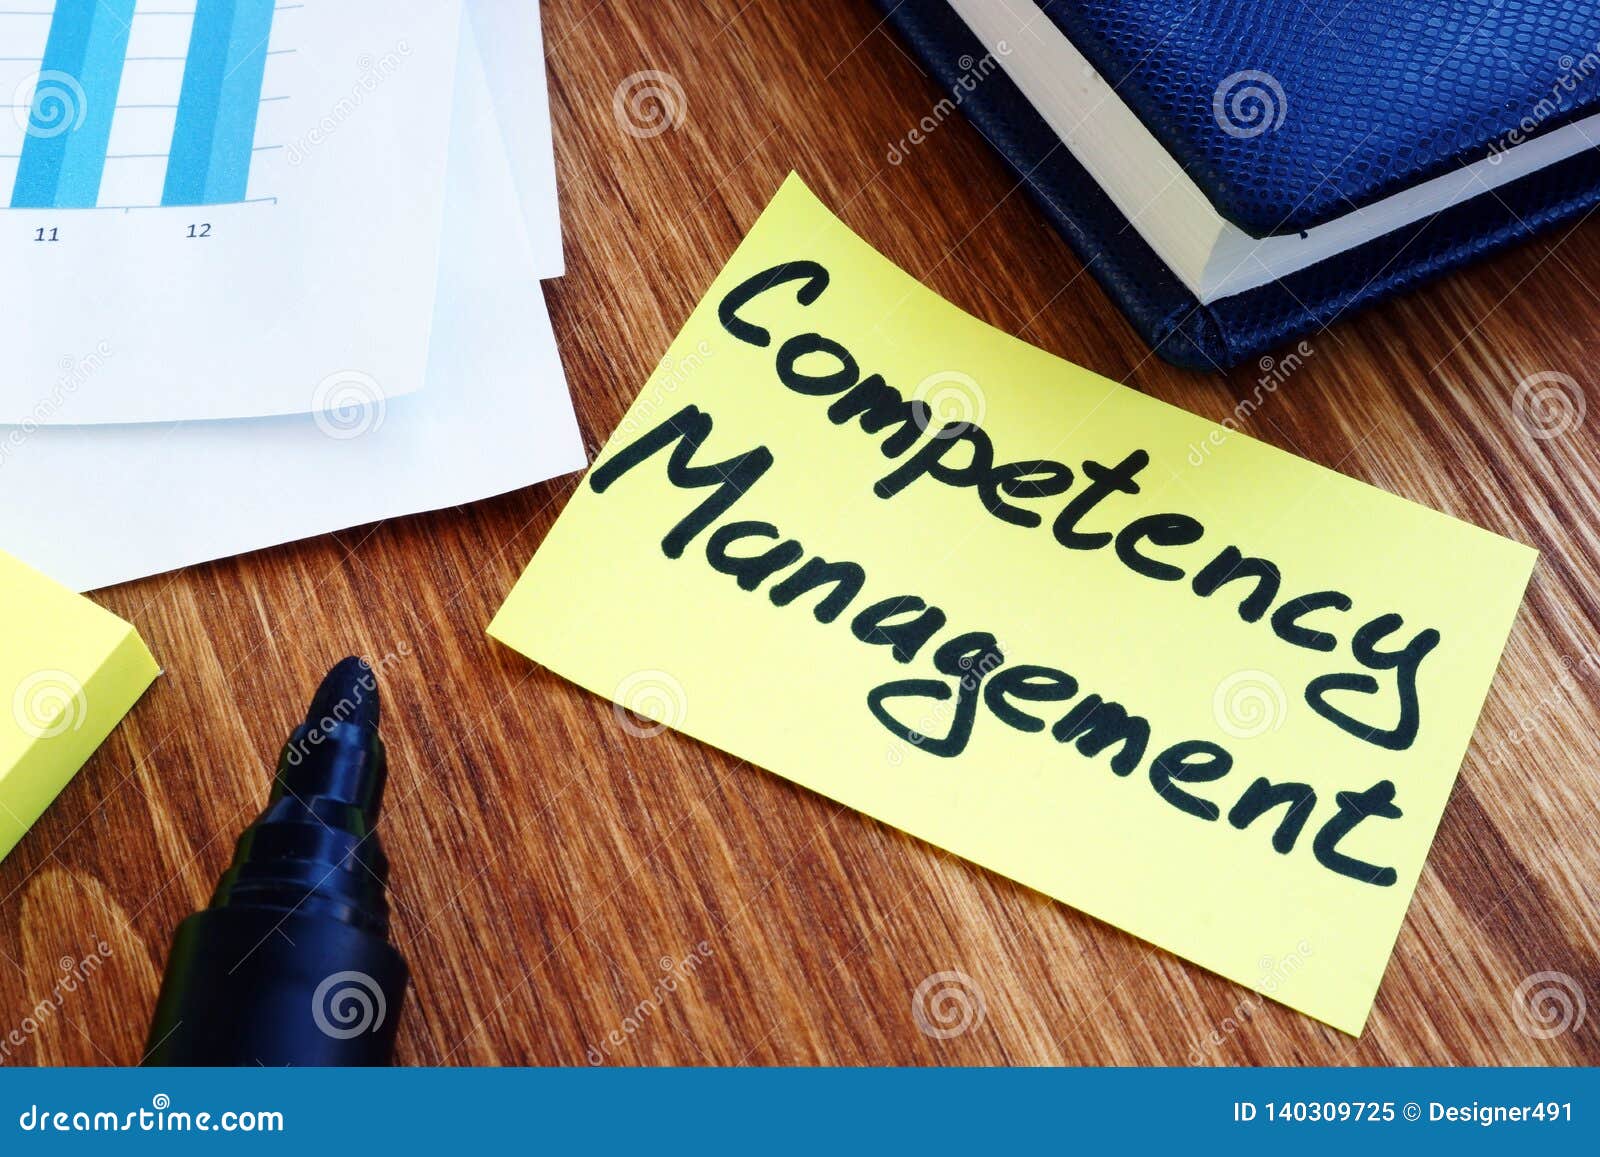 memo stick with competency management. employee value proposition